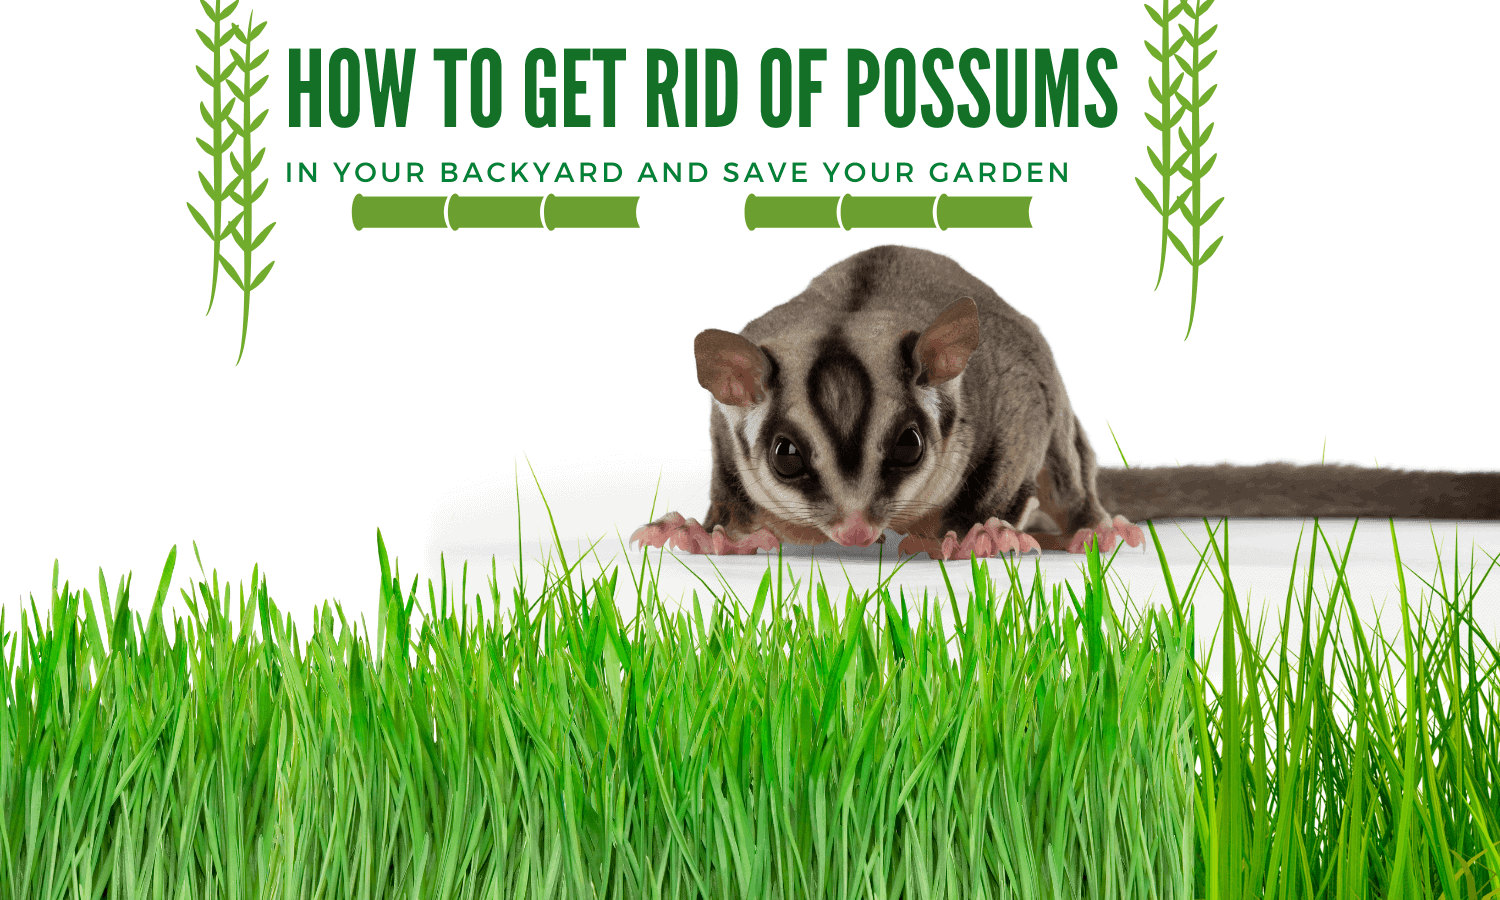 HOW TO GET RID OF POSSUMS IN YOUR BACKYARD